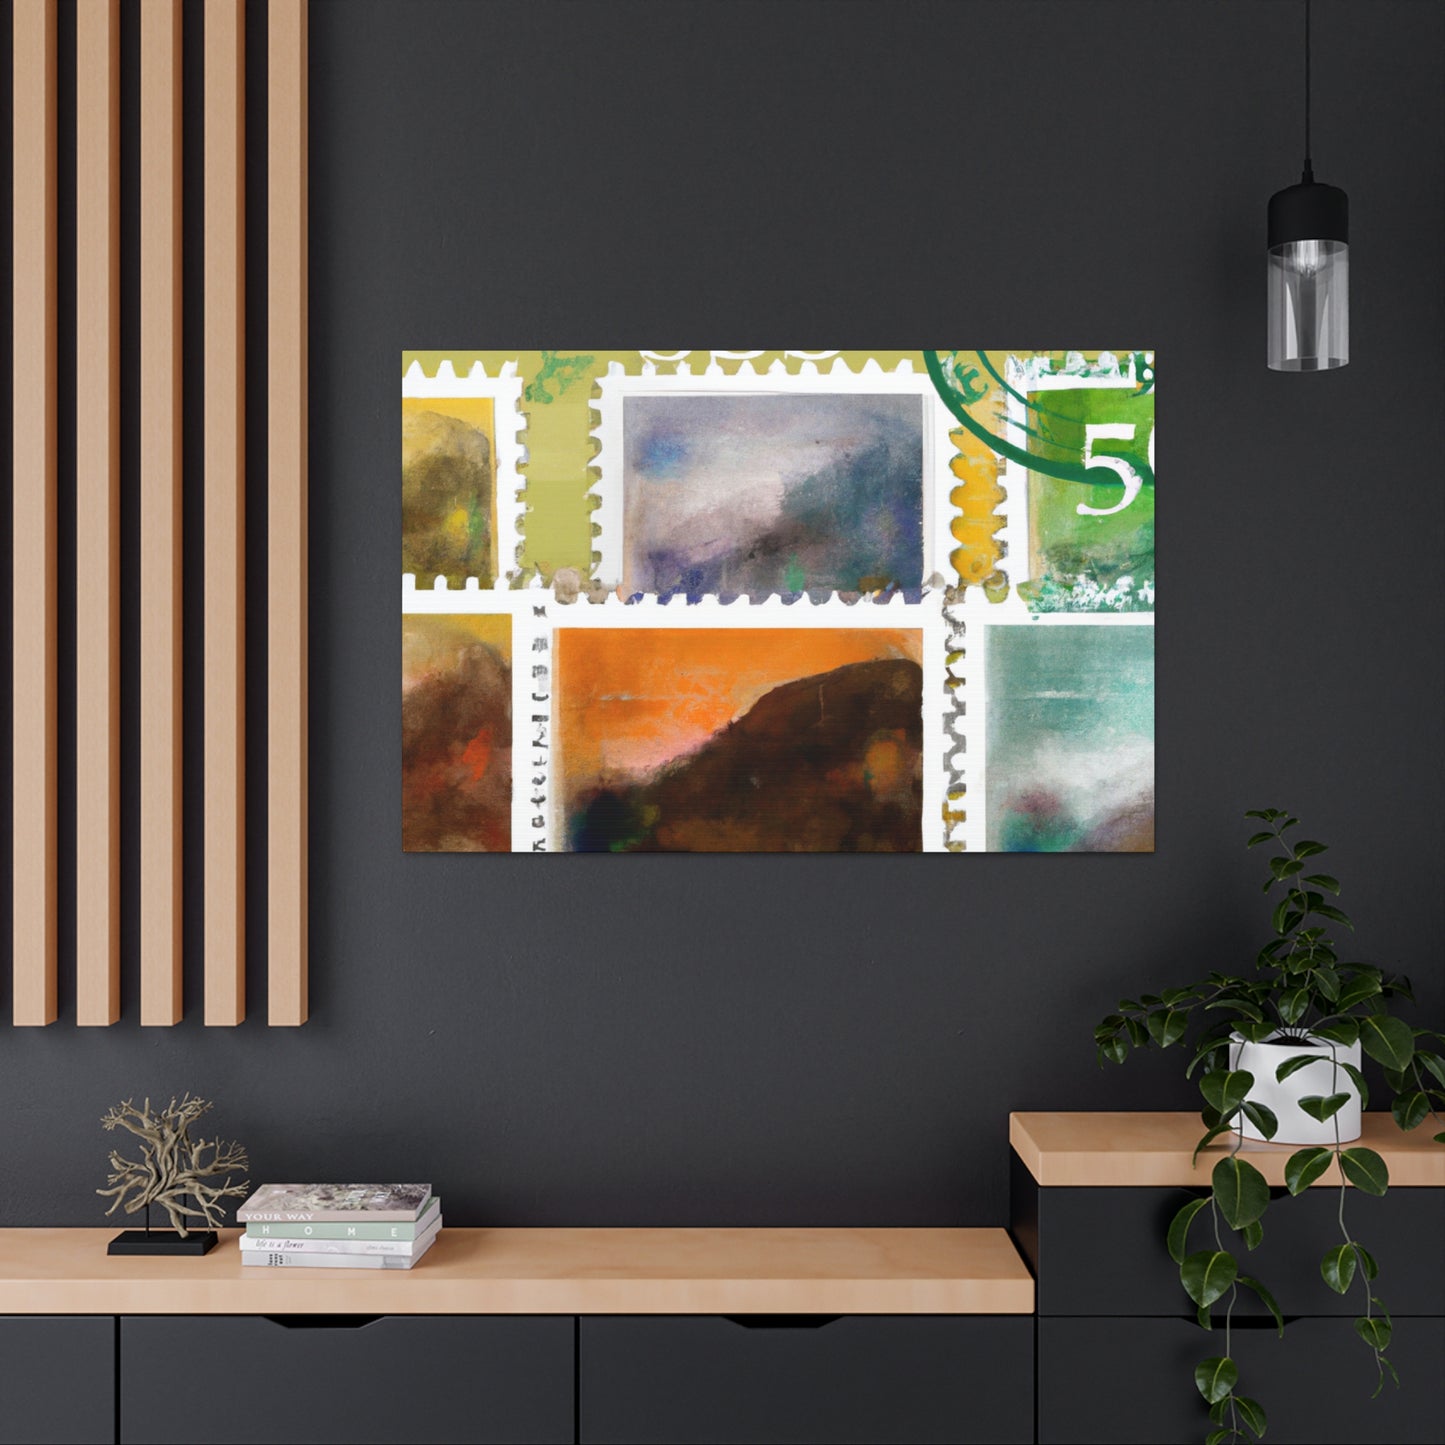 "A World of Wanderlust" - Postage Stamp Collector Canvas Wall Art